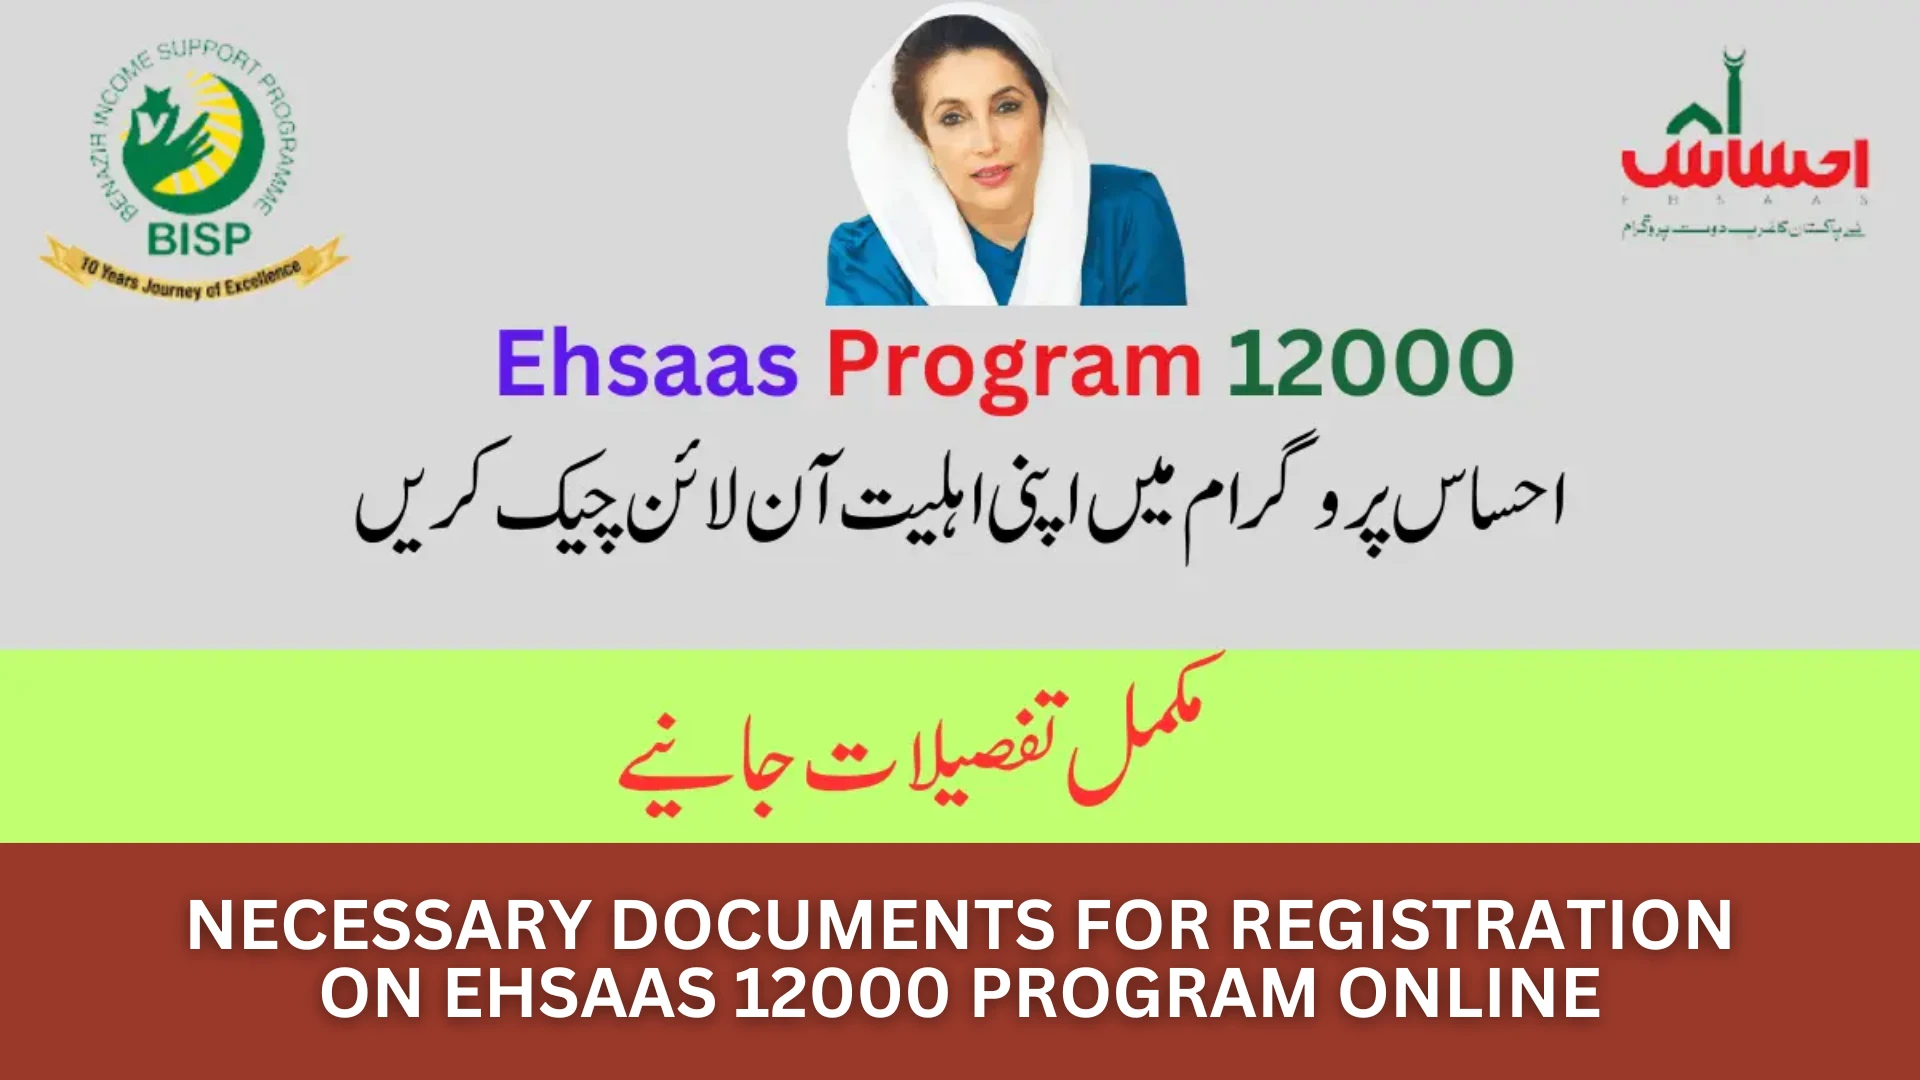 Documents Required For Ehsaas 12000 Program Online Registration